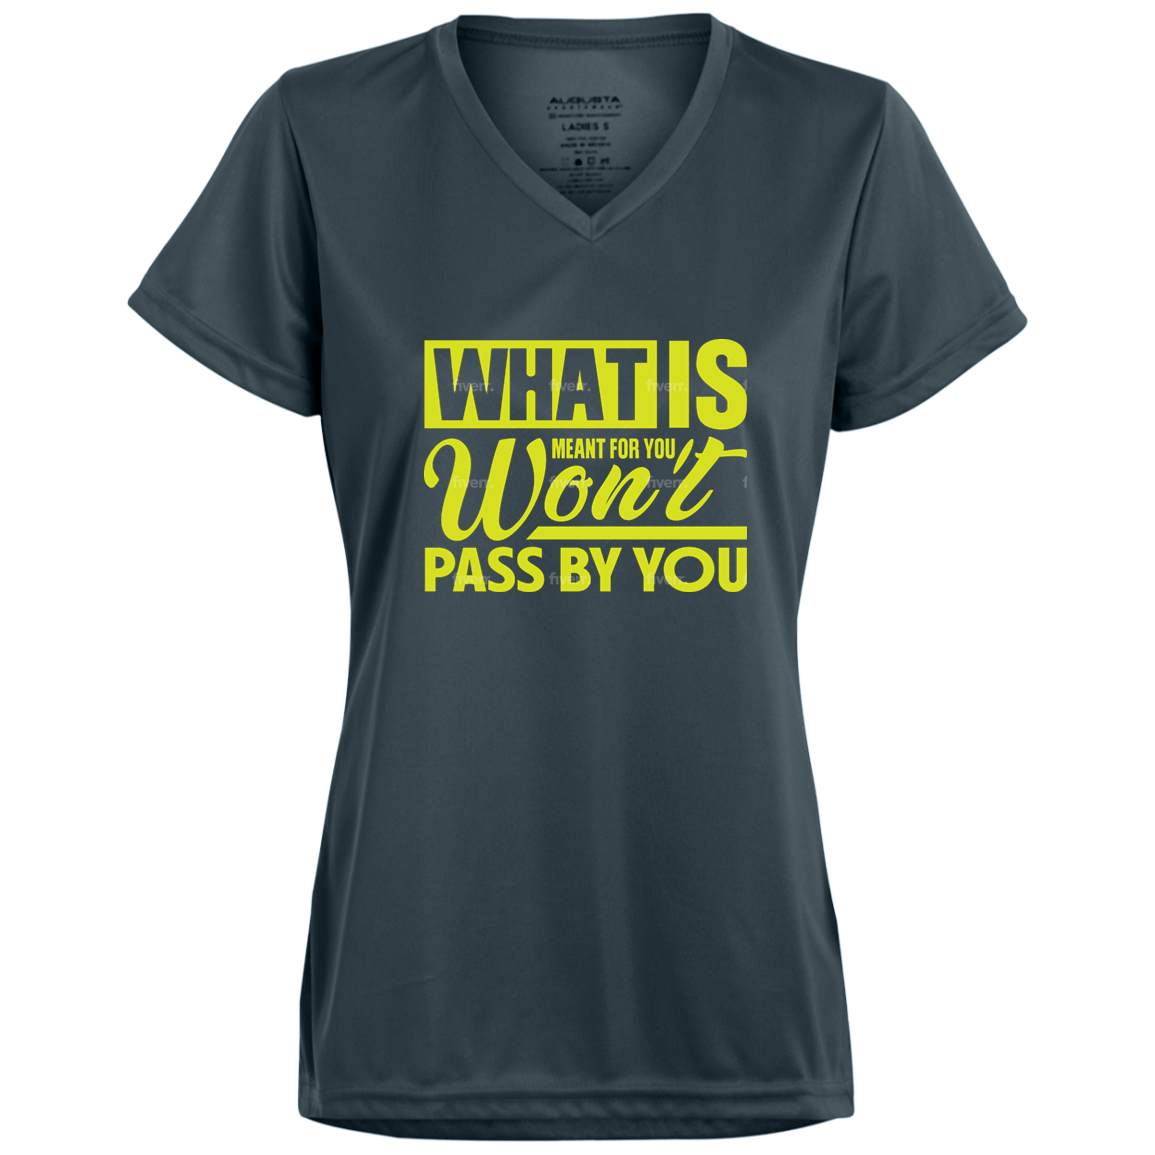 WHAT IS FOR YOU L Moisture-Wicking V-Neck Tee